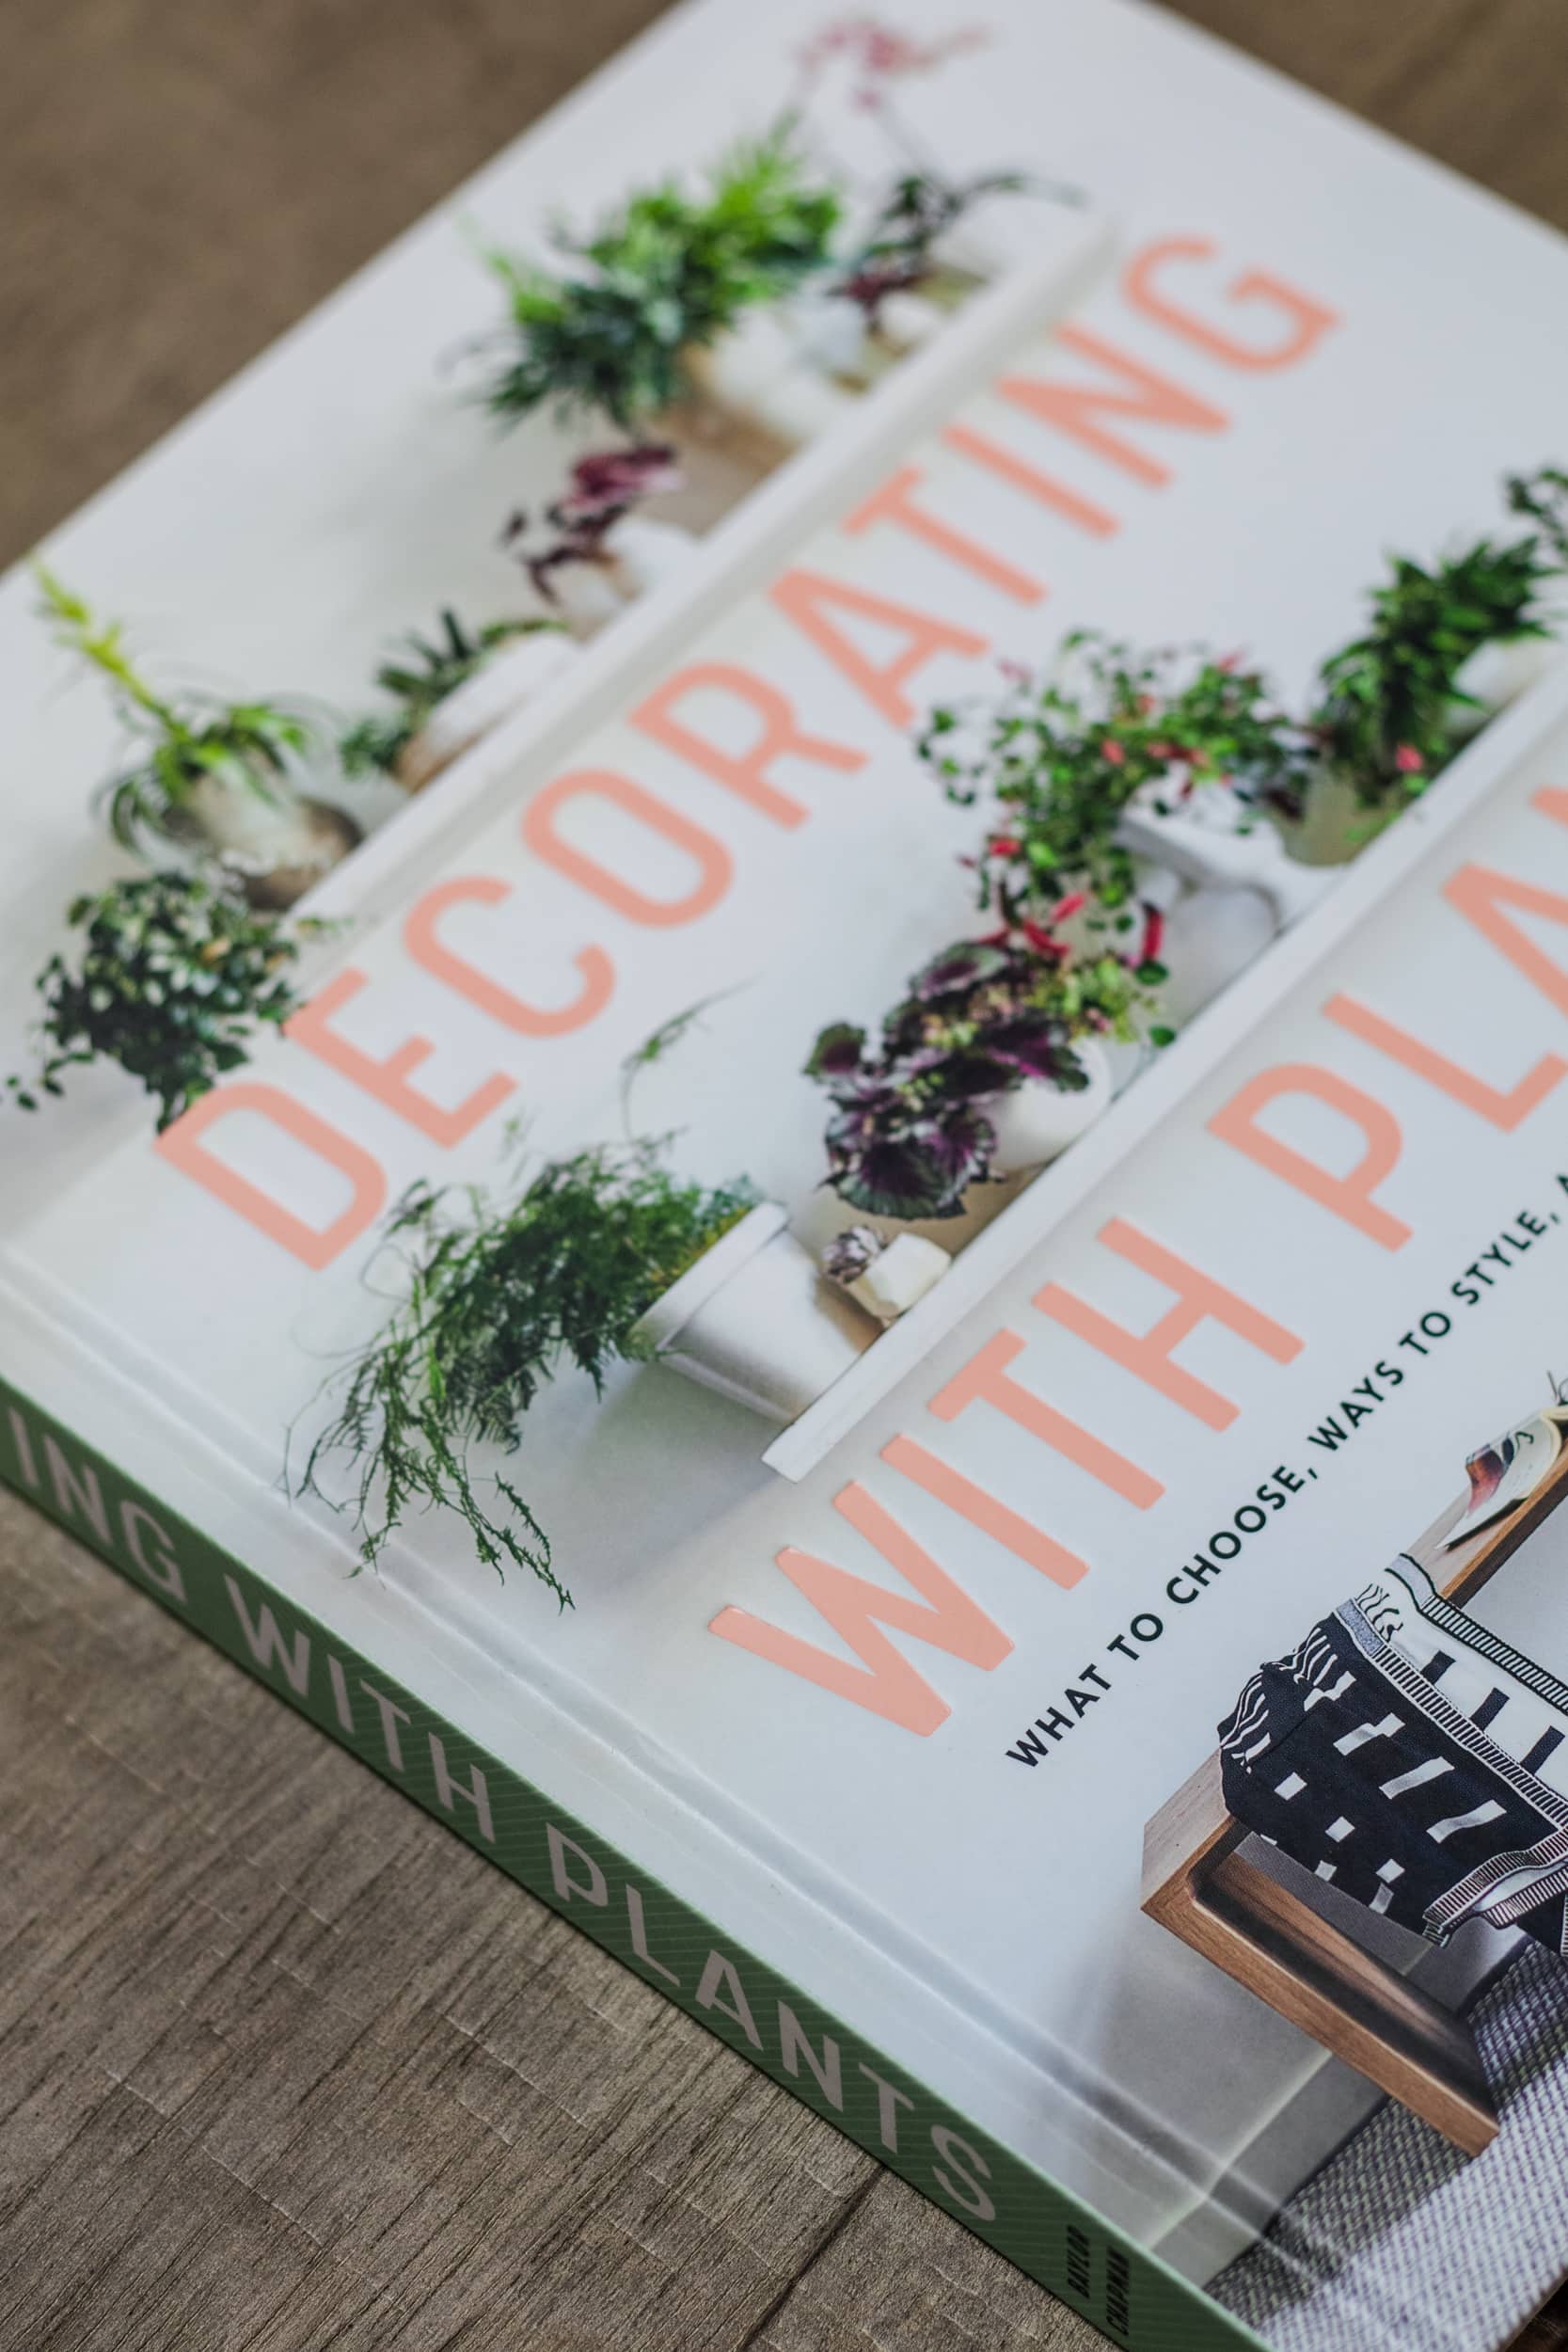 Decorating with Plants by Baylor Chapman